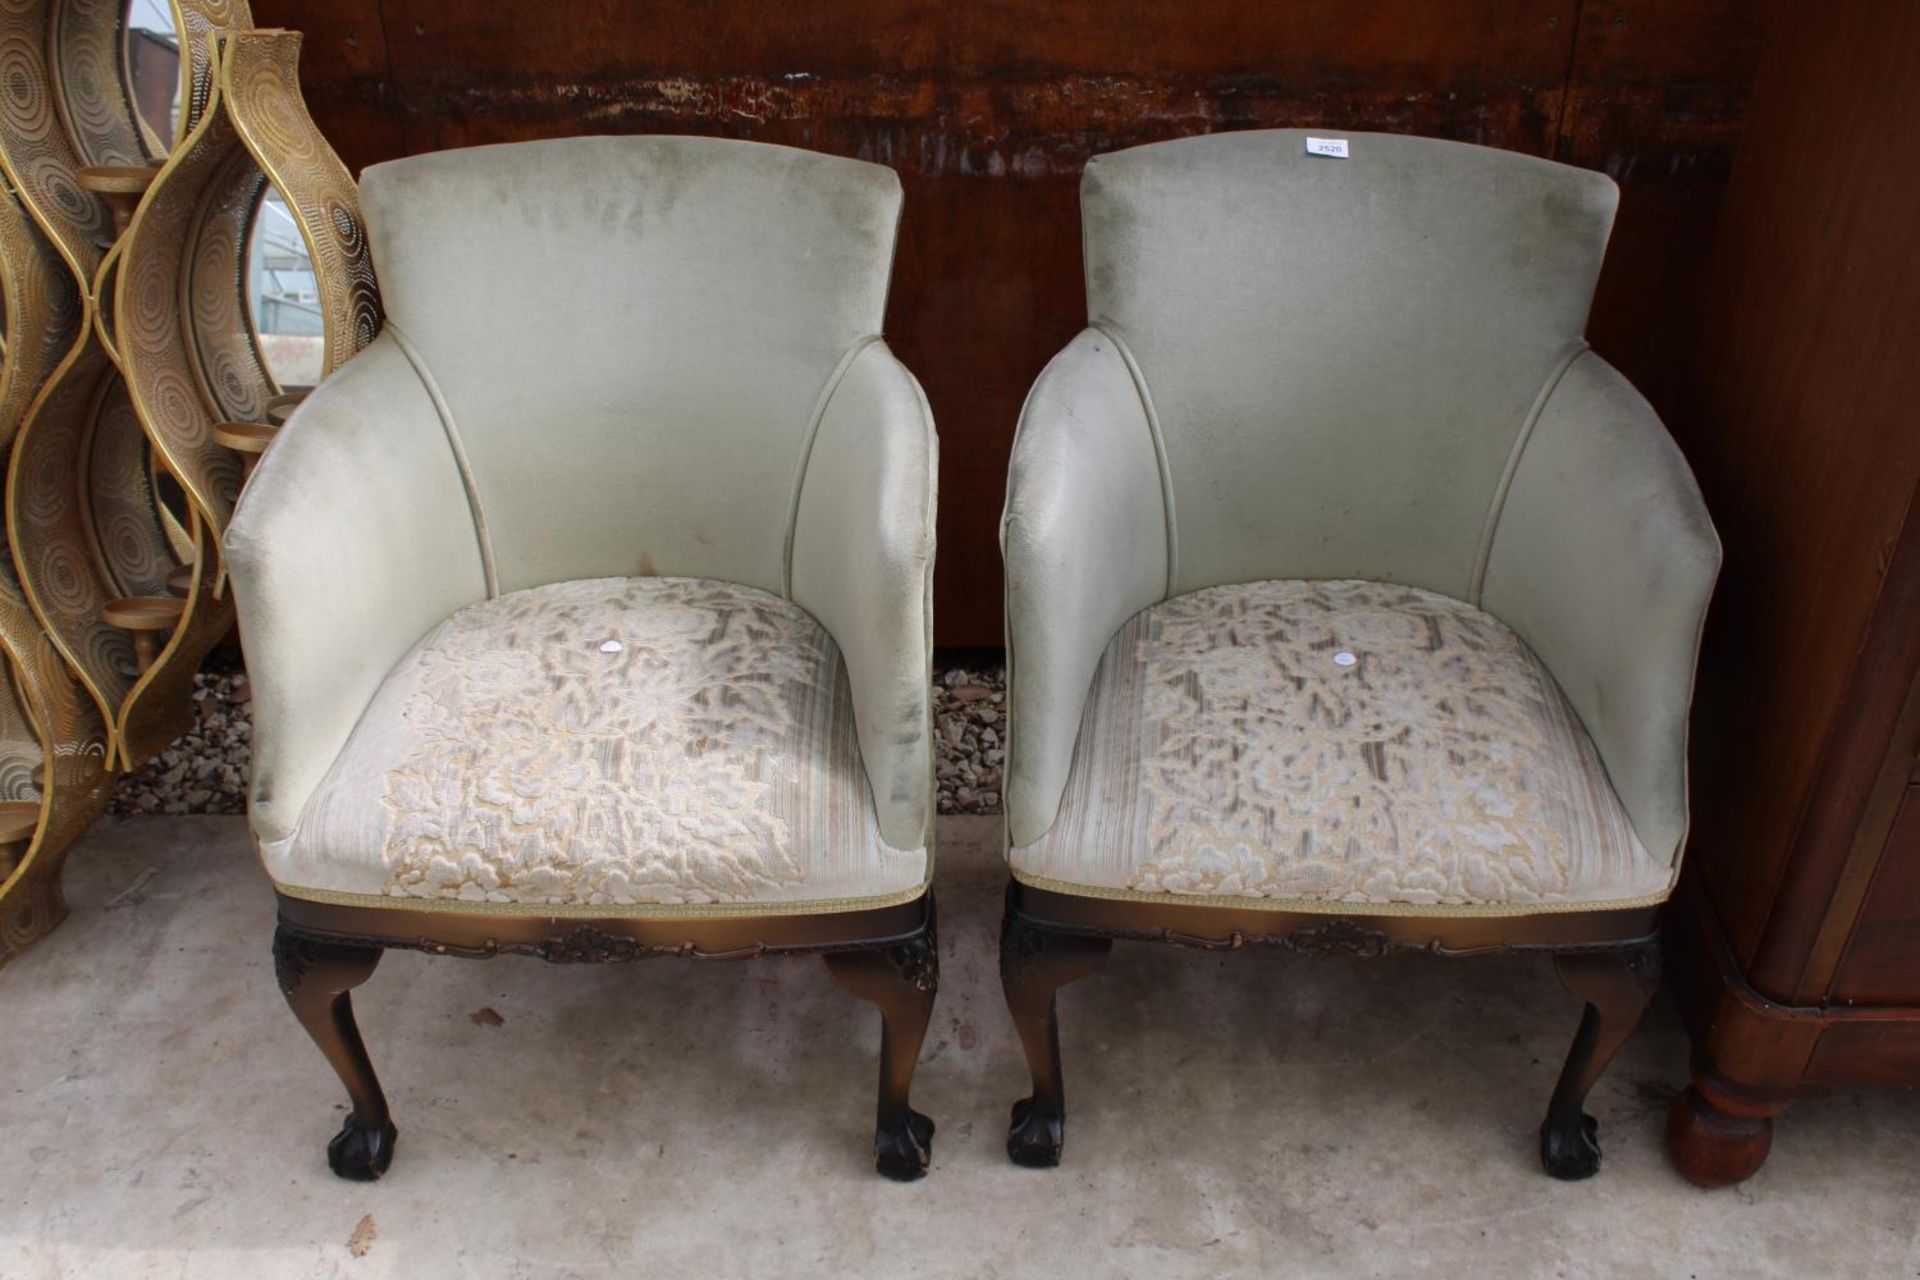 A PAIR OF MODERN UPHOSTERED TUB CHAIRS ON FRONT CABRIOLE LEGS WITH BALL AND CLAW FEET